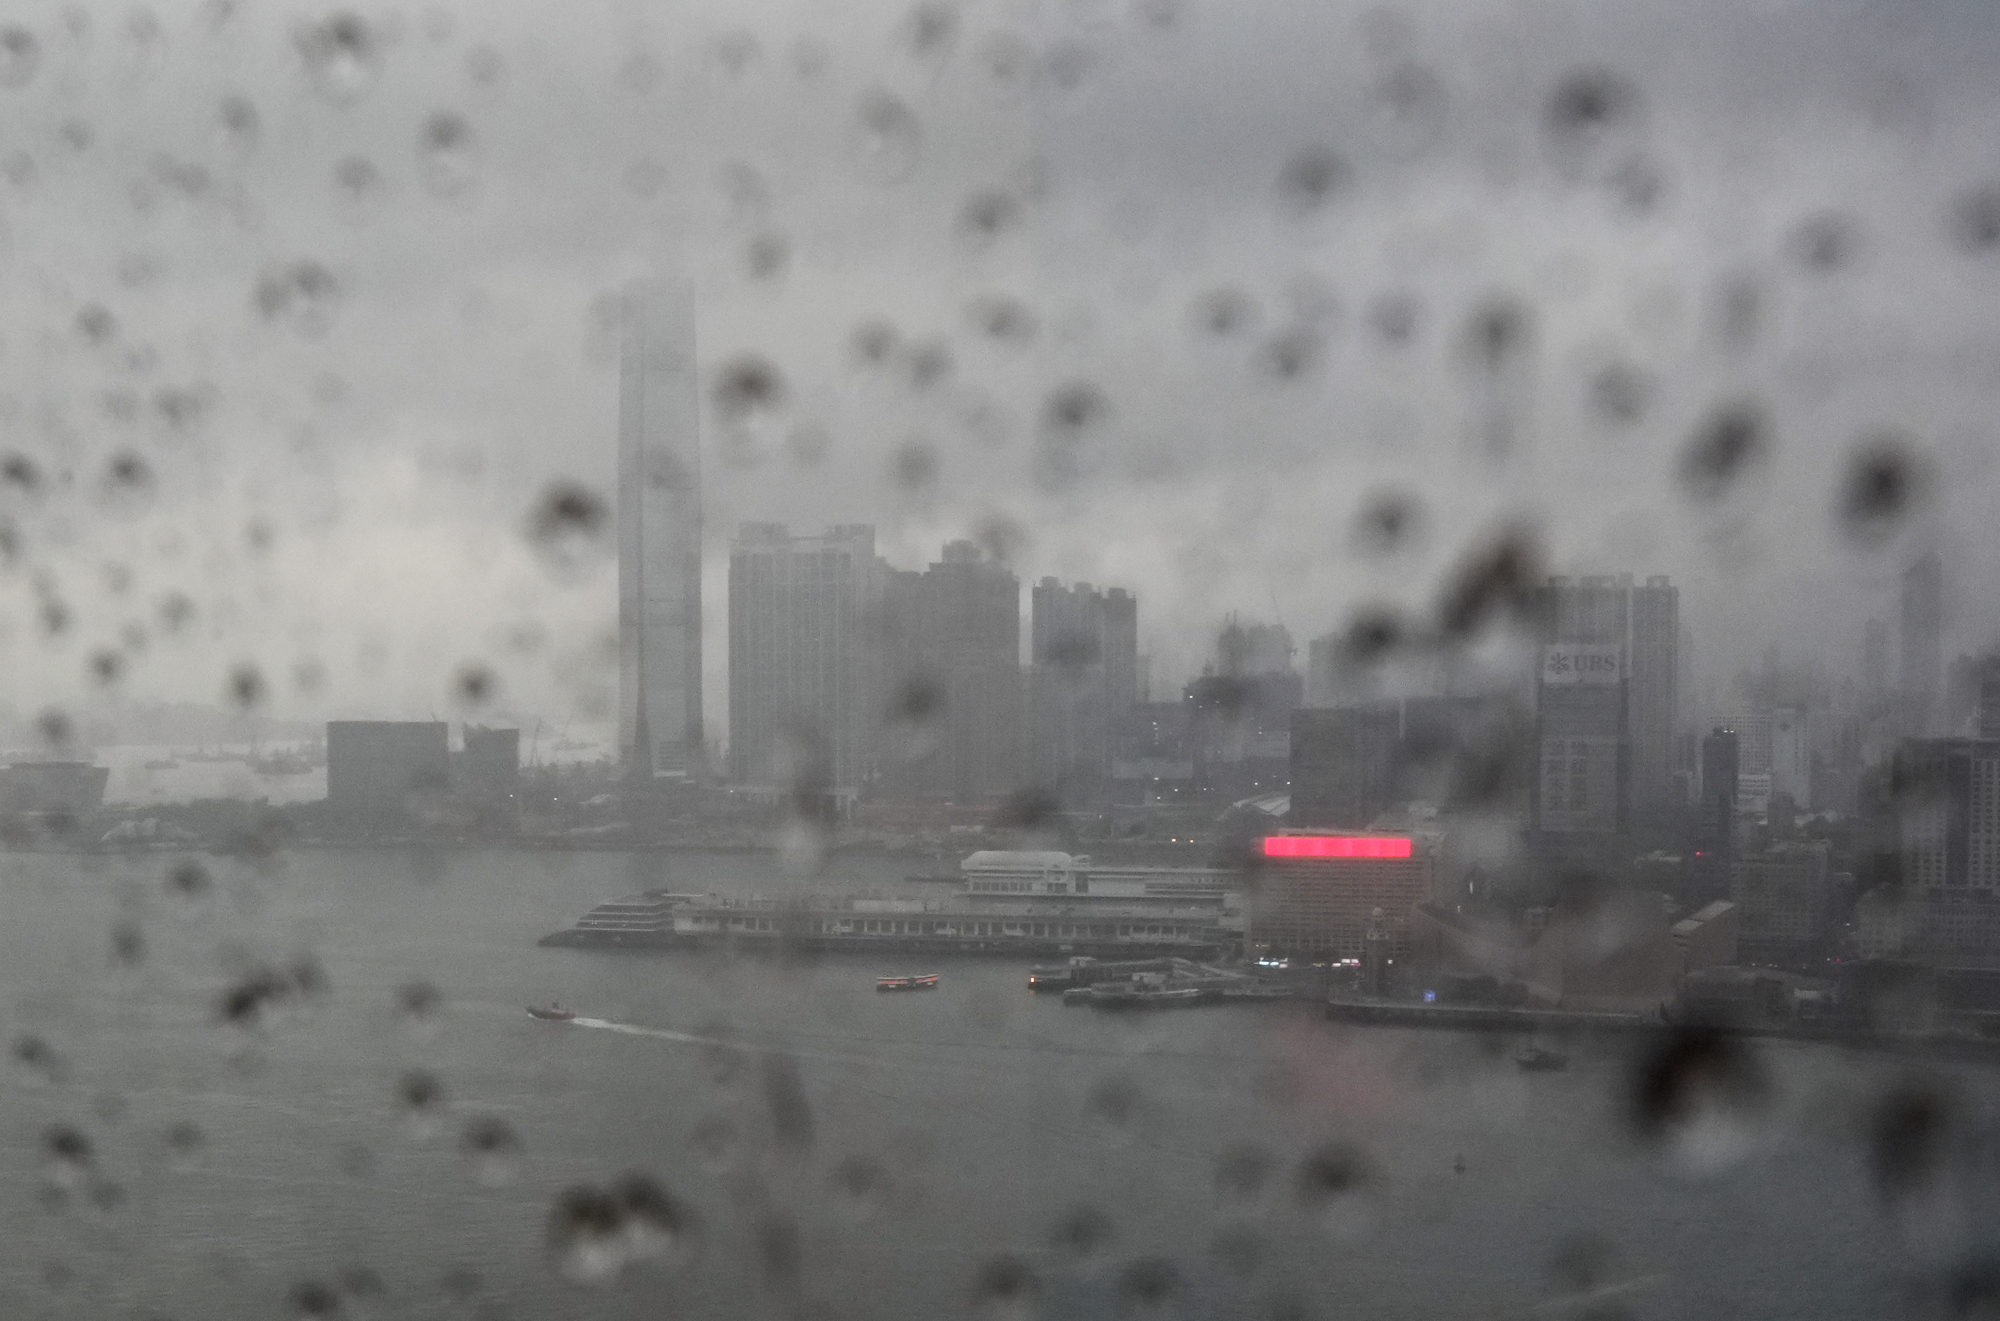 The Hong Kong Observatory has issued multiple amber storm warnings in recent days. Photo: Eugene Lee